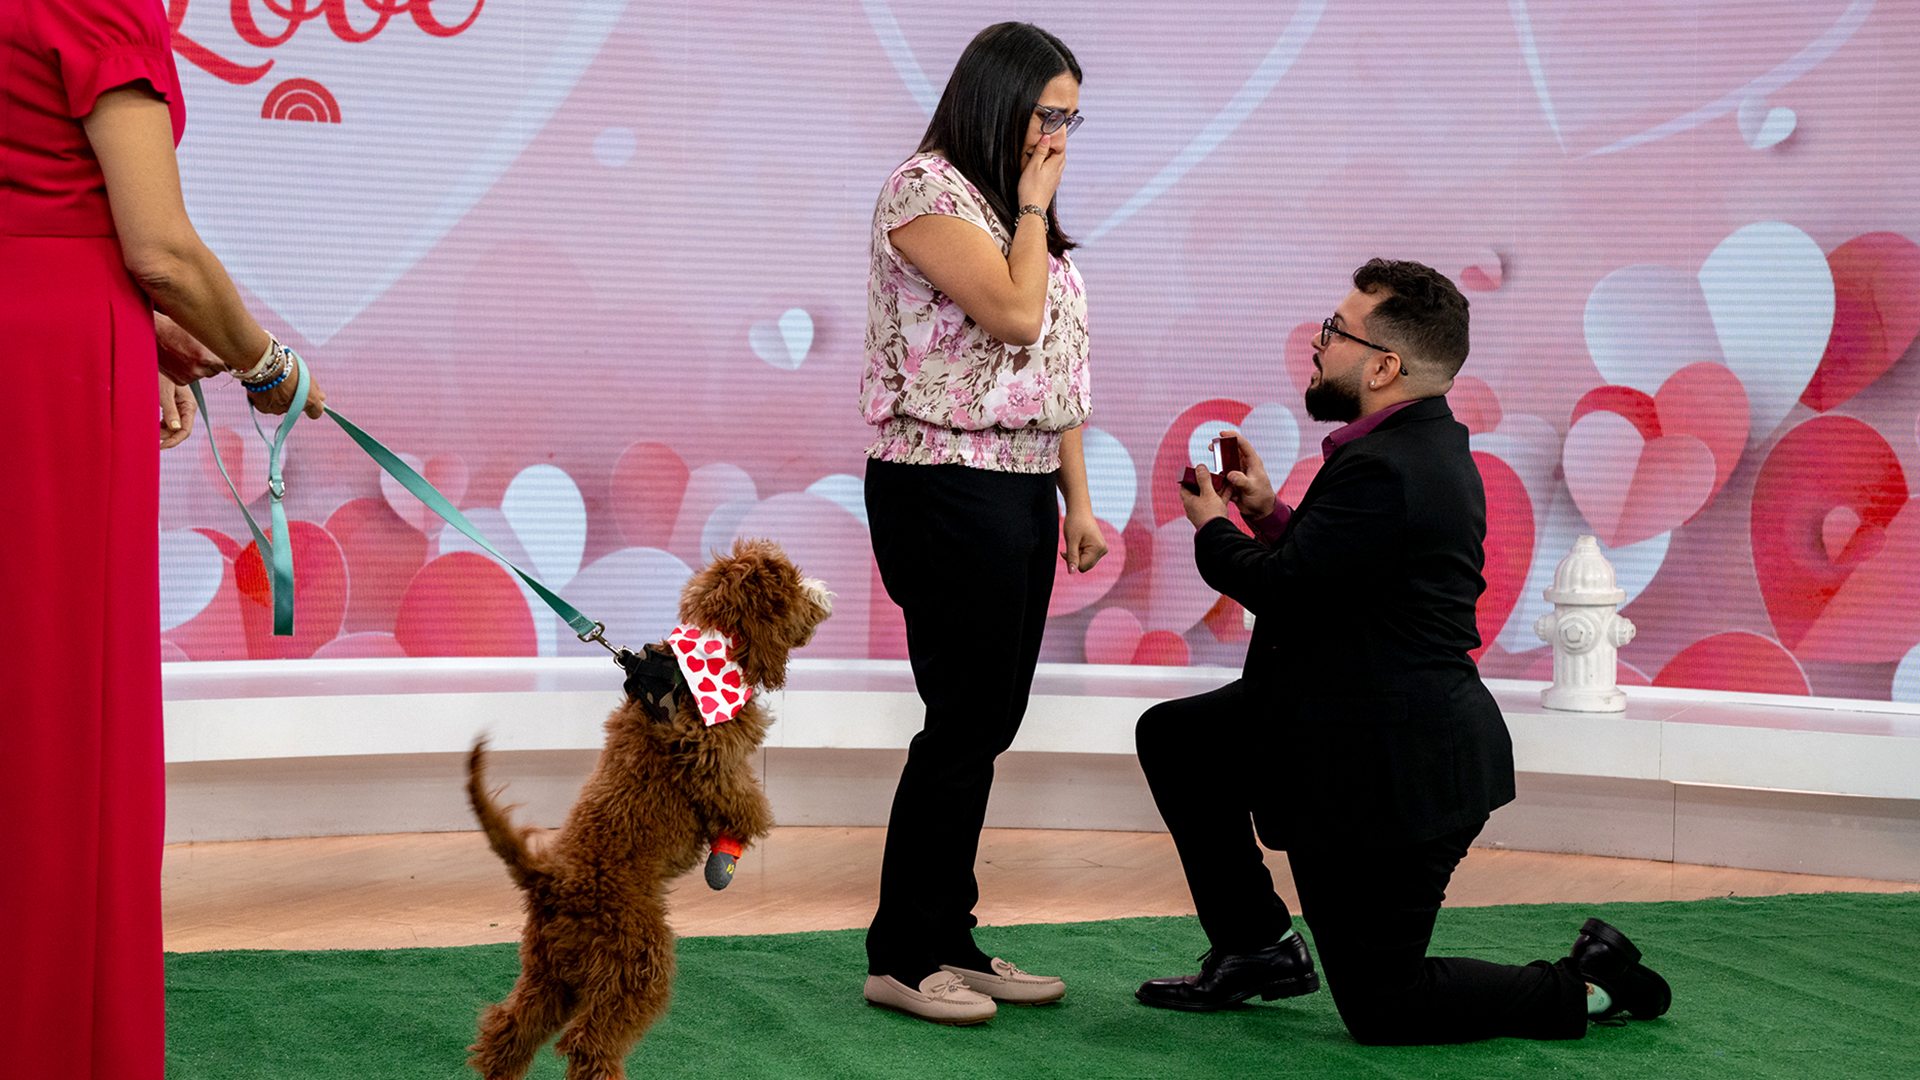 Veterinarian gets surprise marriage proposal live on TODAY